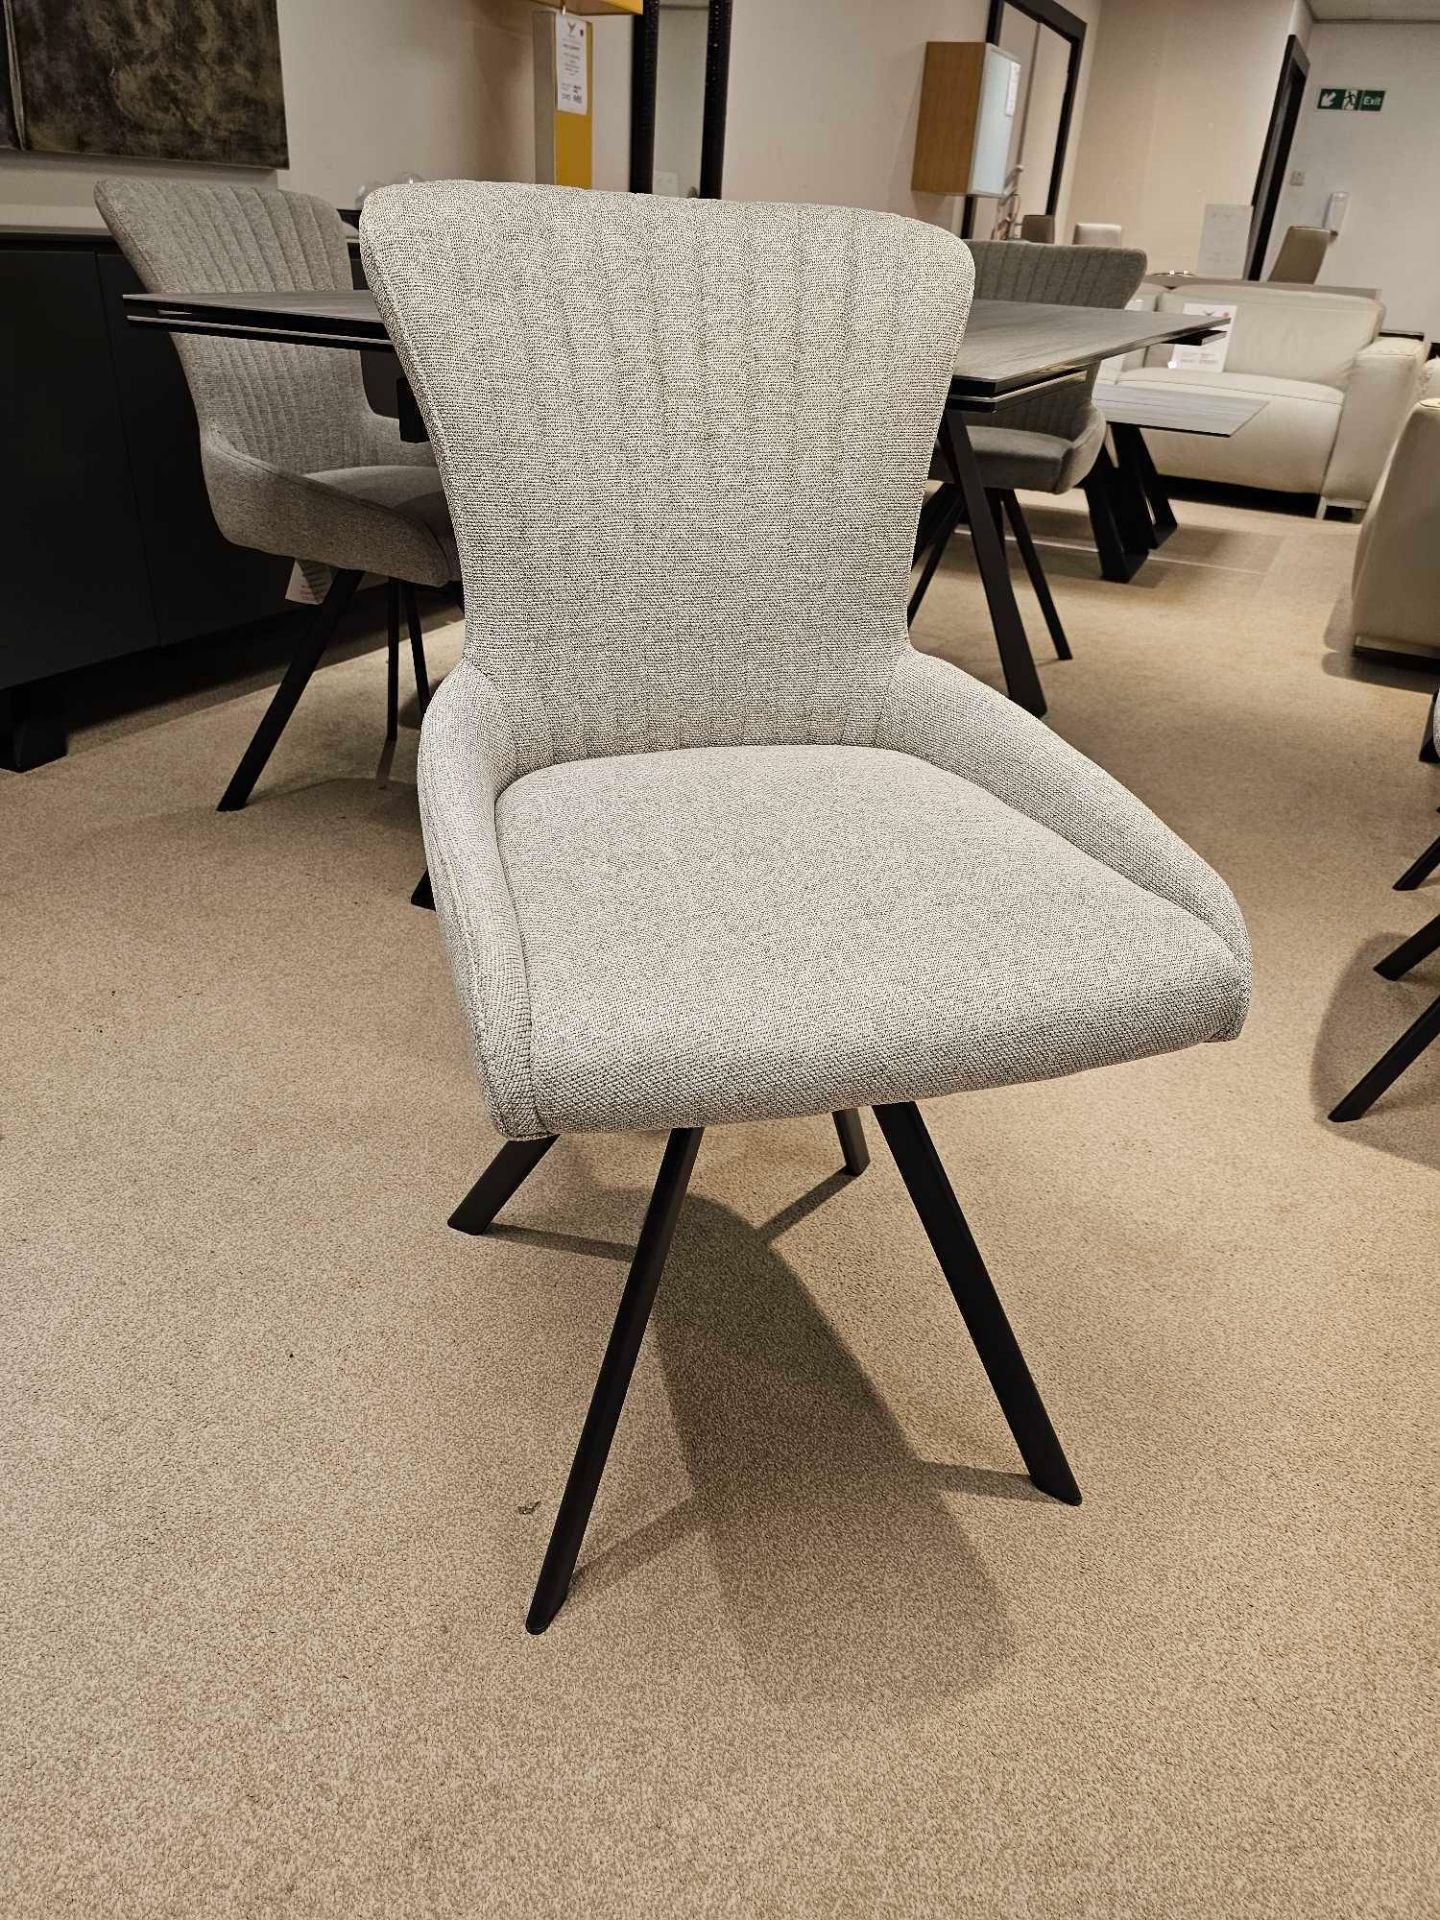 A Set of 6 x Maria Chairs by Kesterport Maria has the same self-return mechanism as many of the